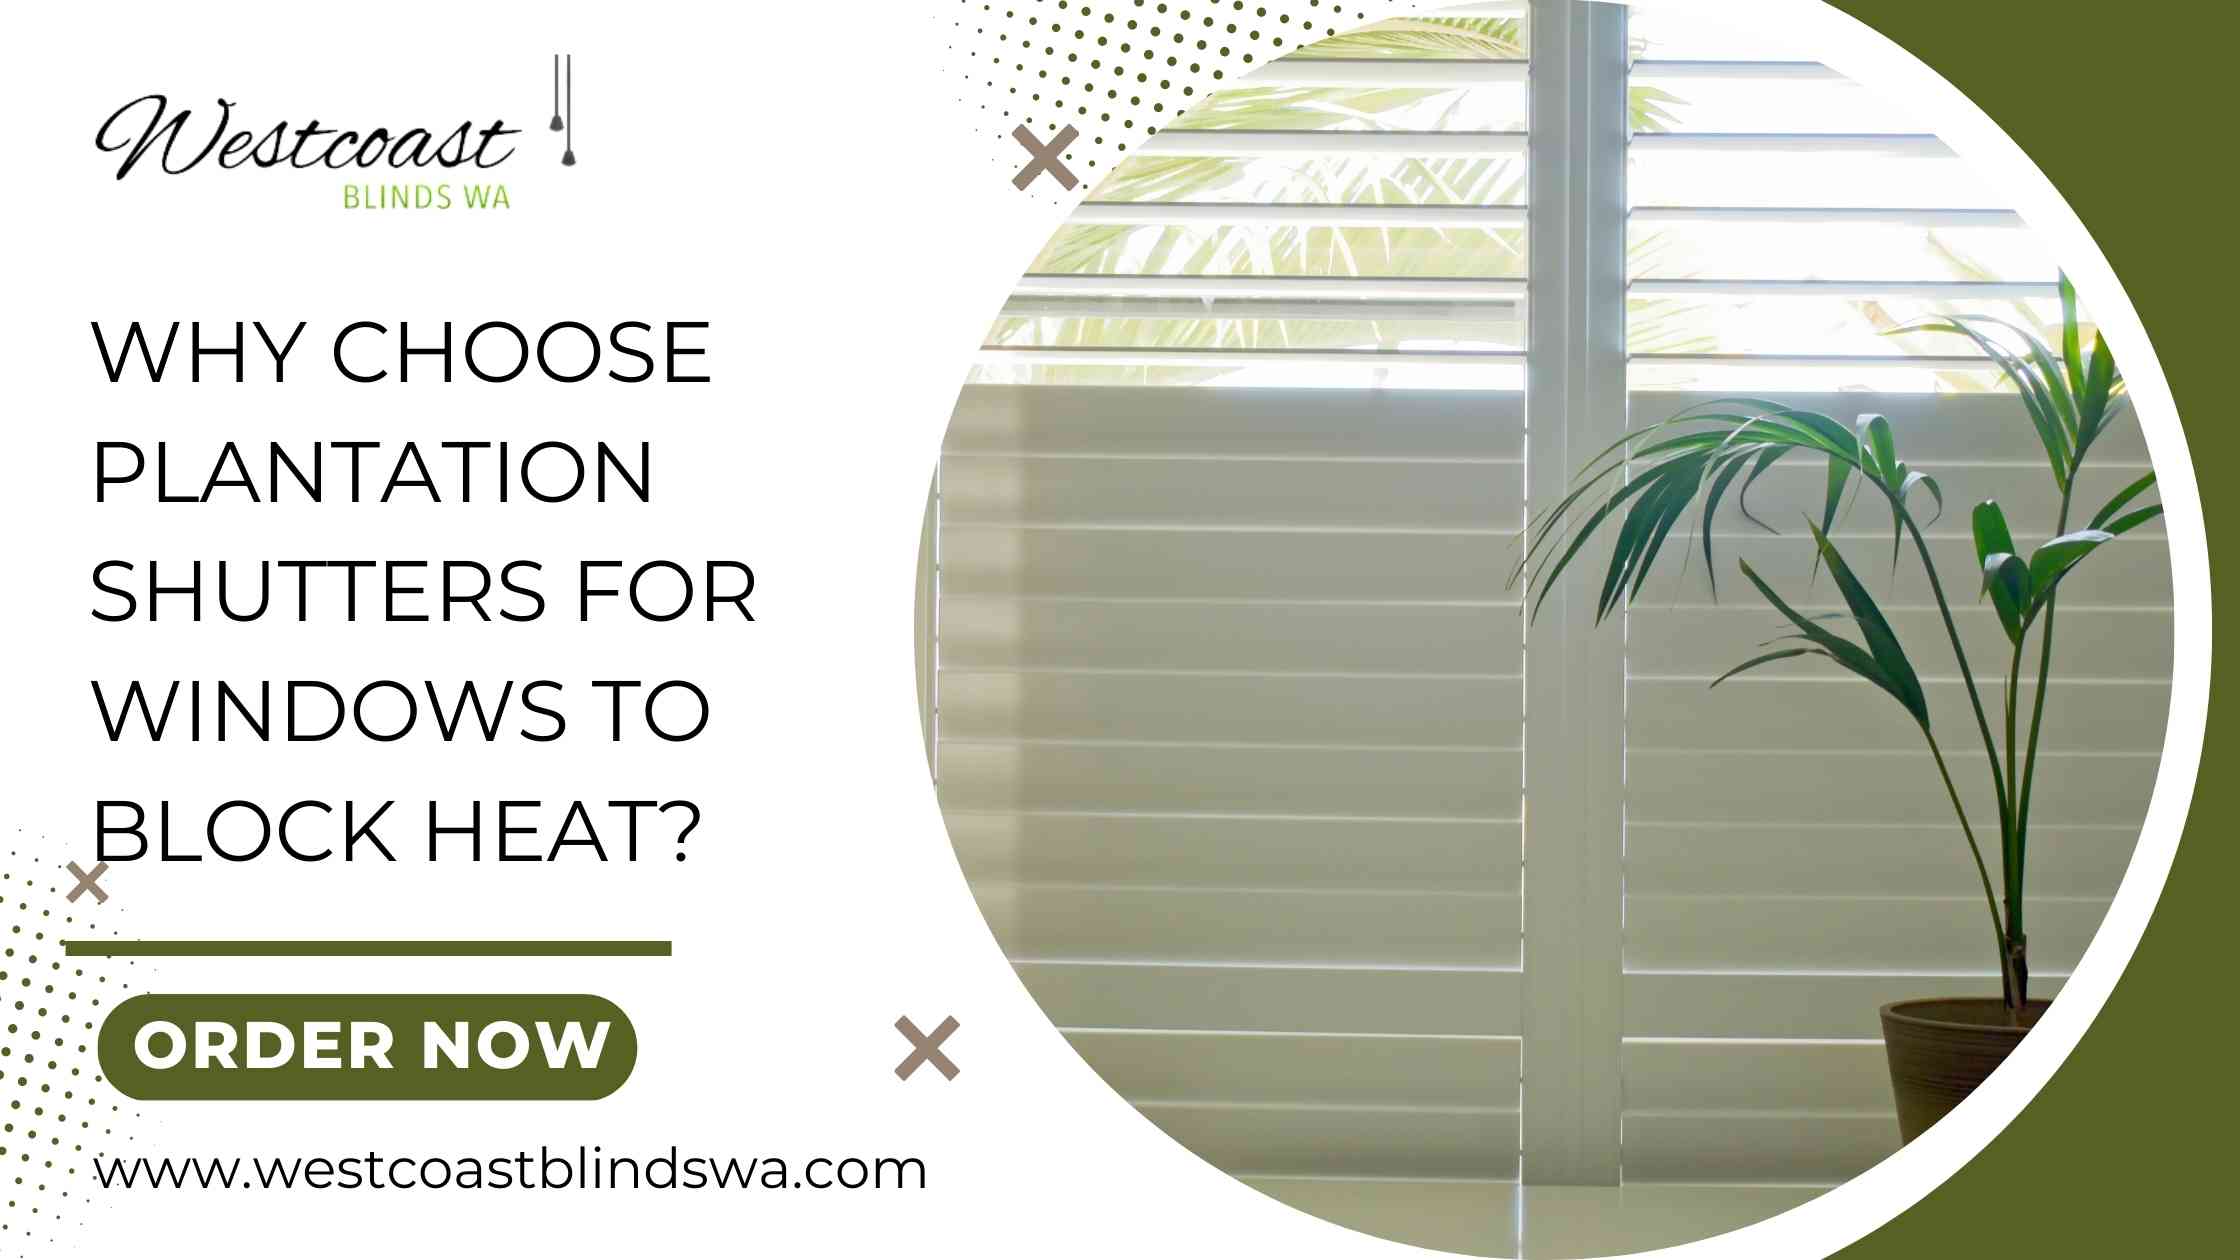 How Successful Are Plantation Shutters In Blocking Heat?